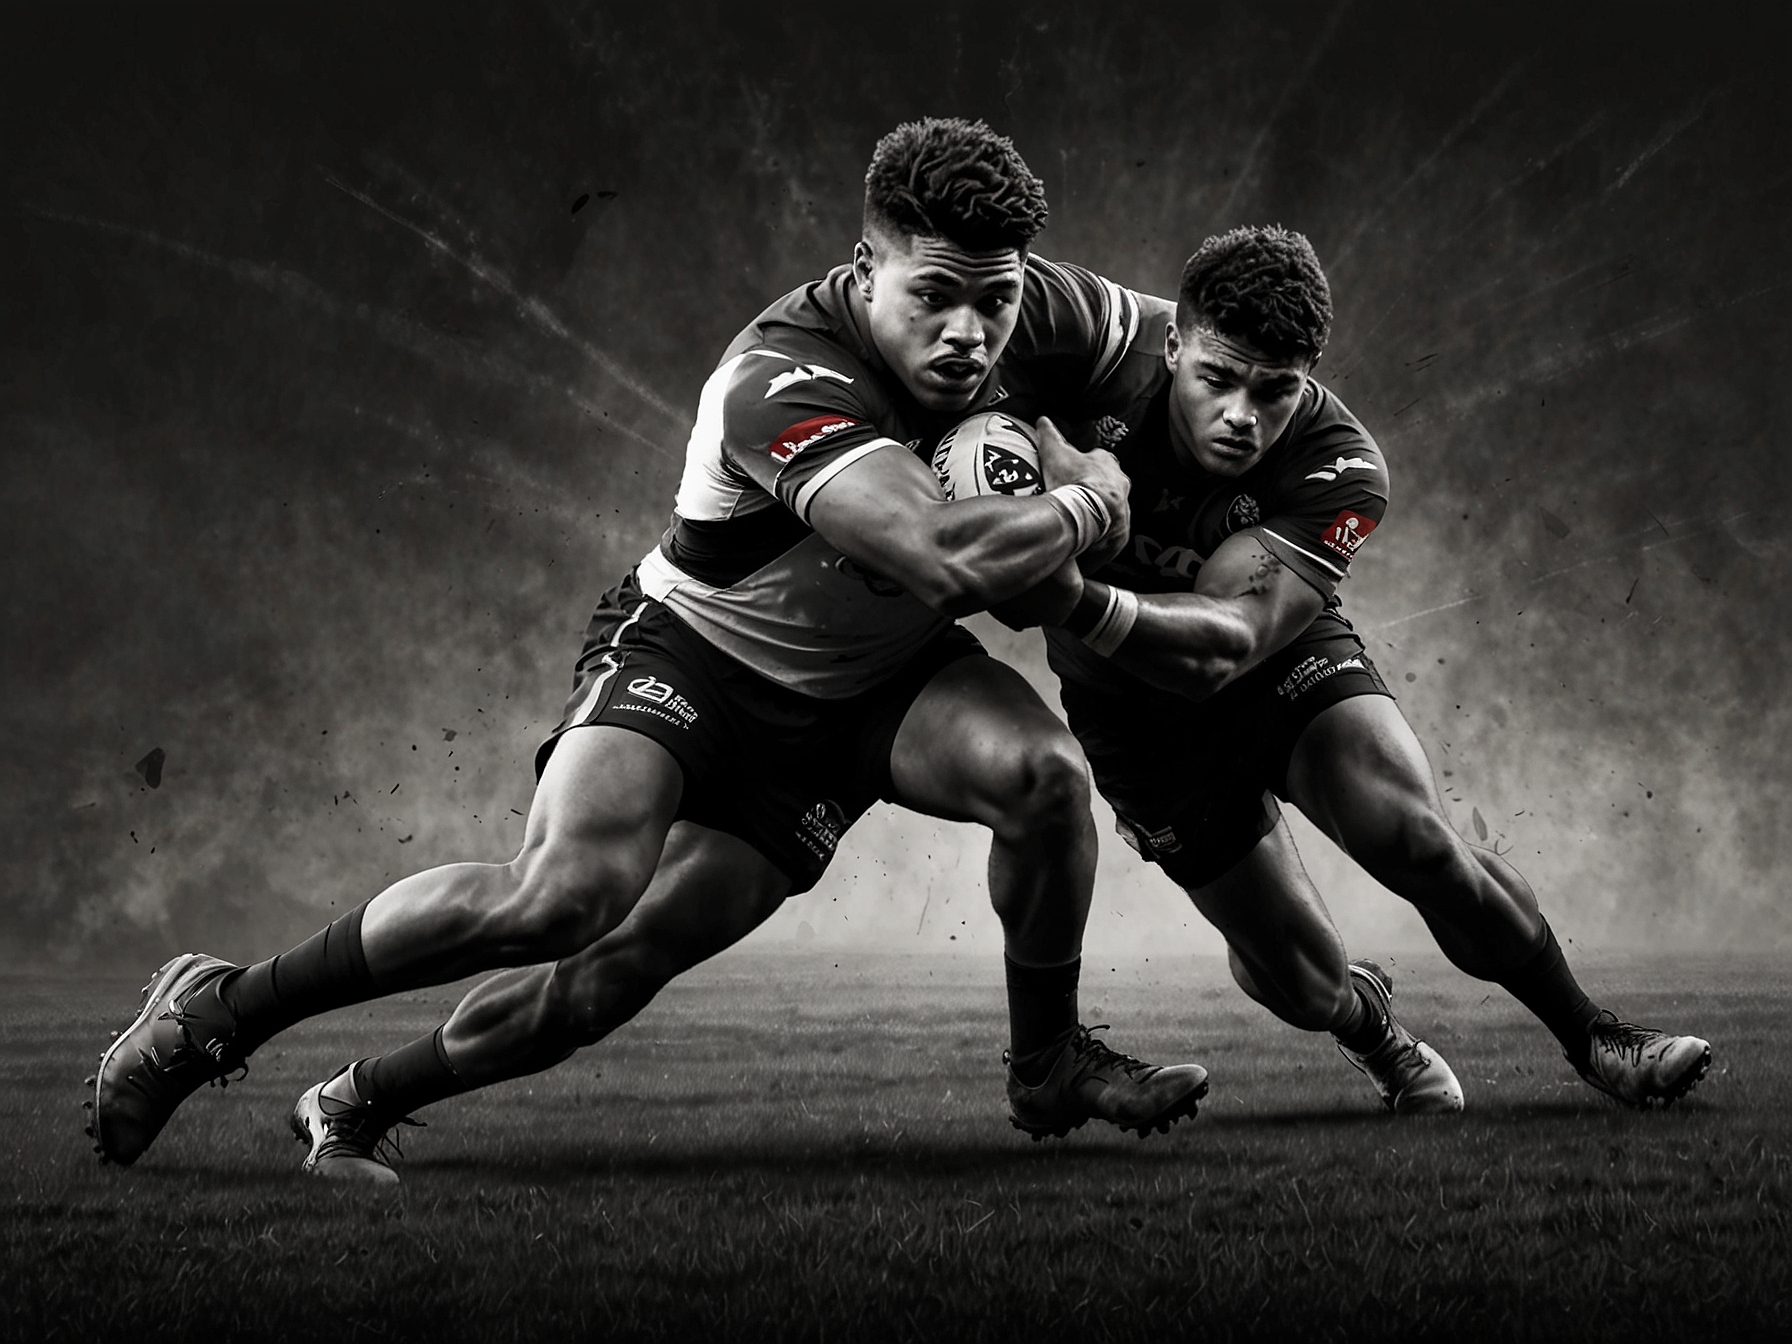 Latrell Mitchell executing a crucial tackle, emphasizing his role as the last line of defense. His positioning and strength in the fullback position prevent opposition tries and launch counter-attacks.